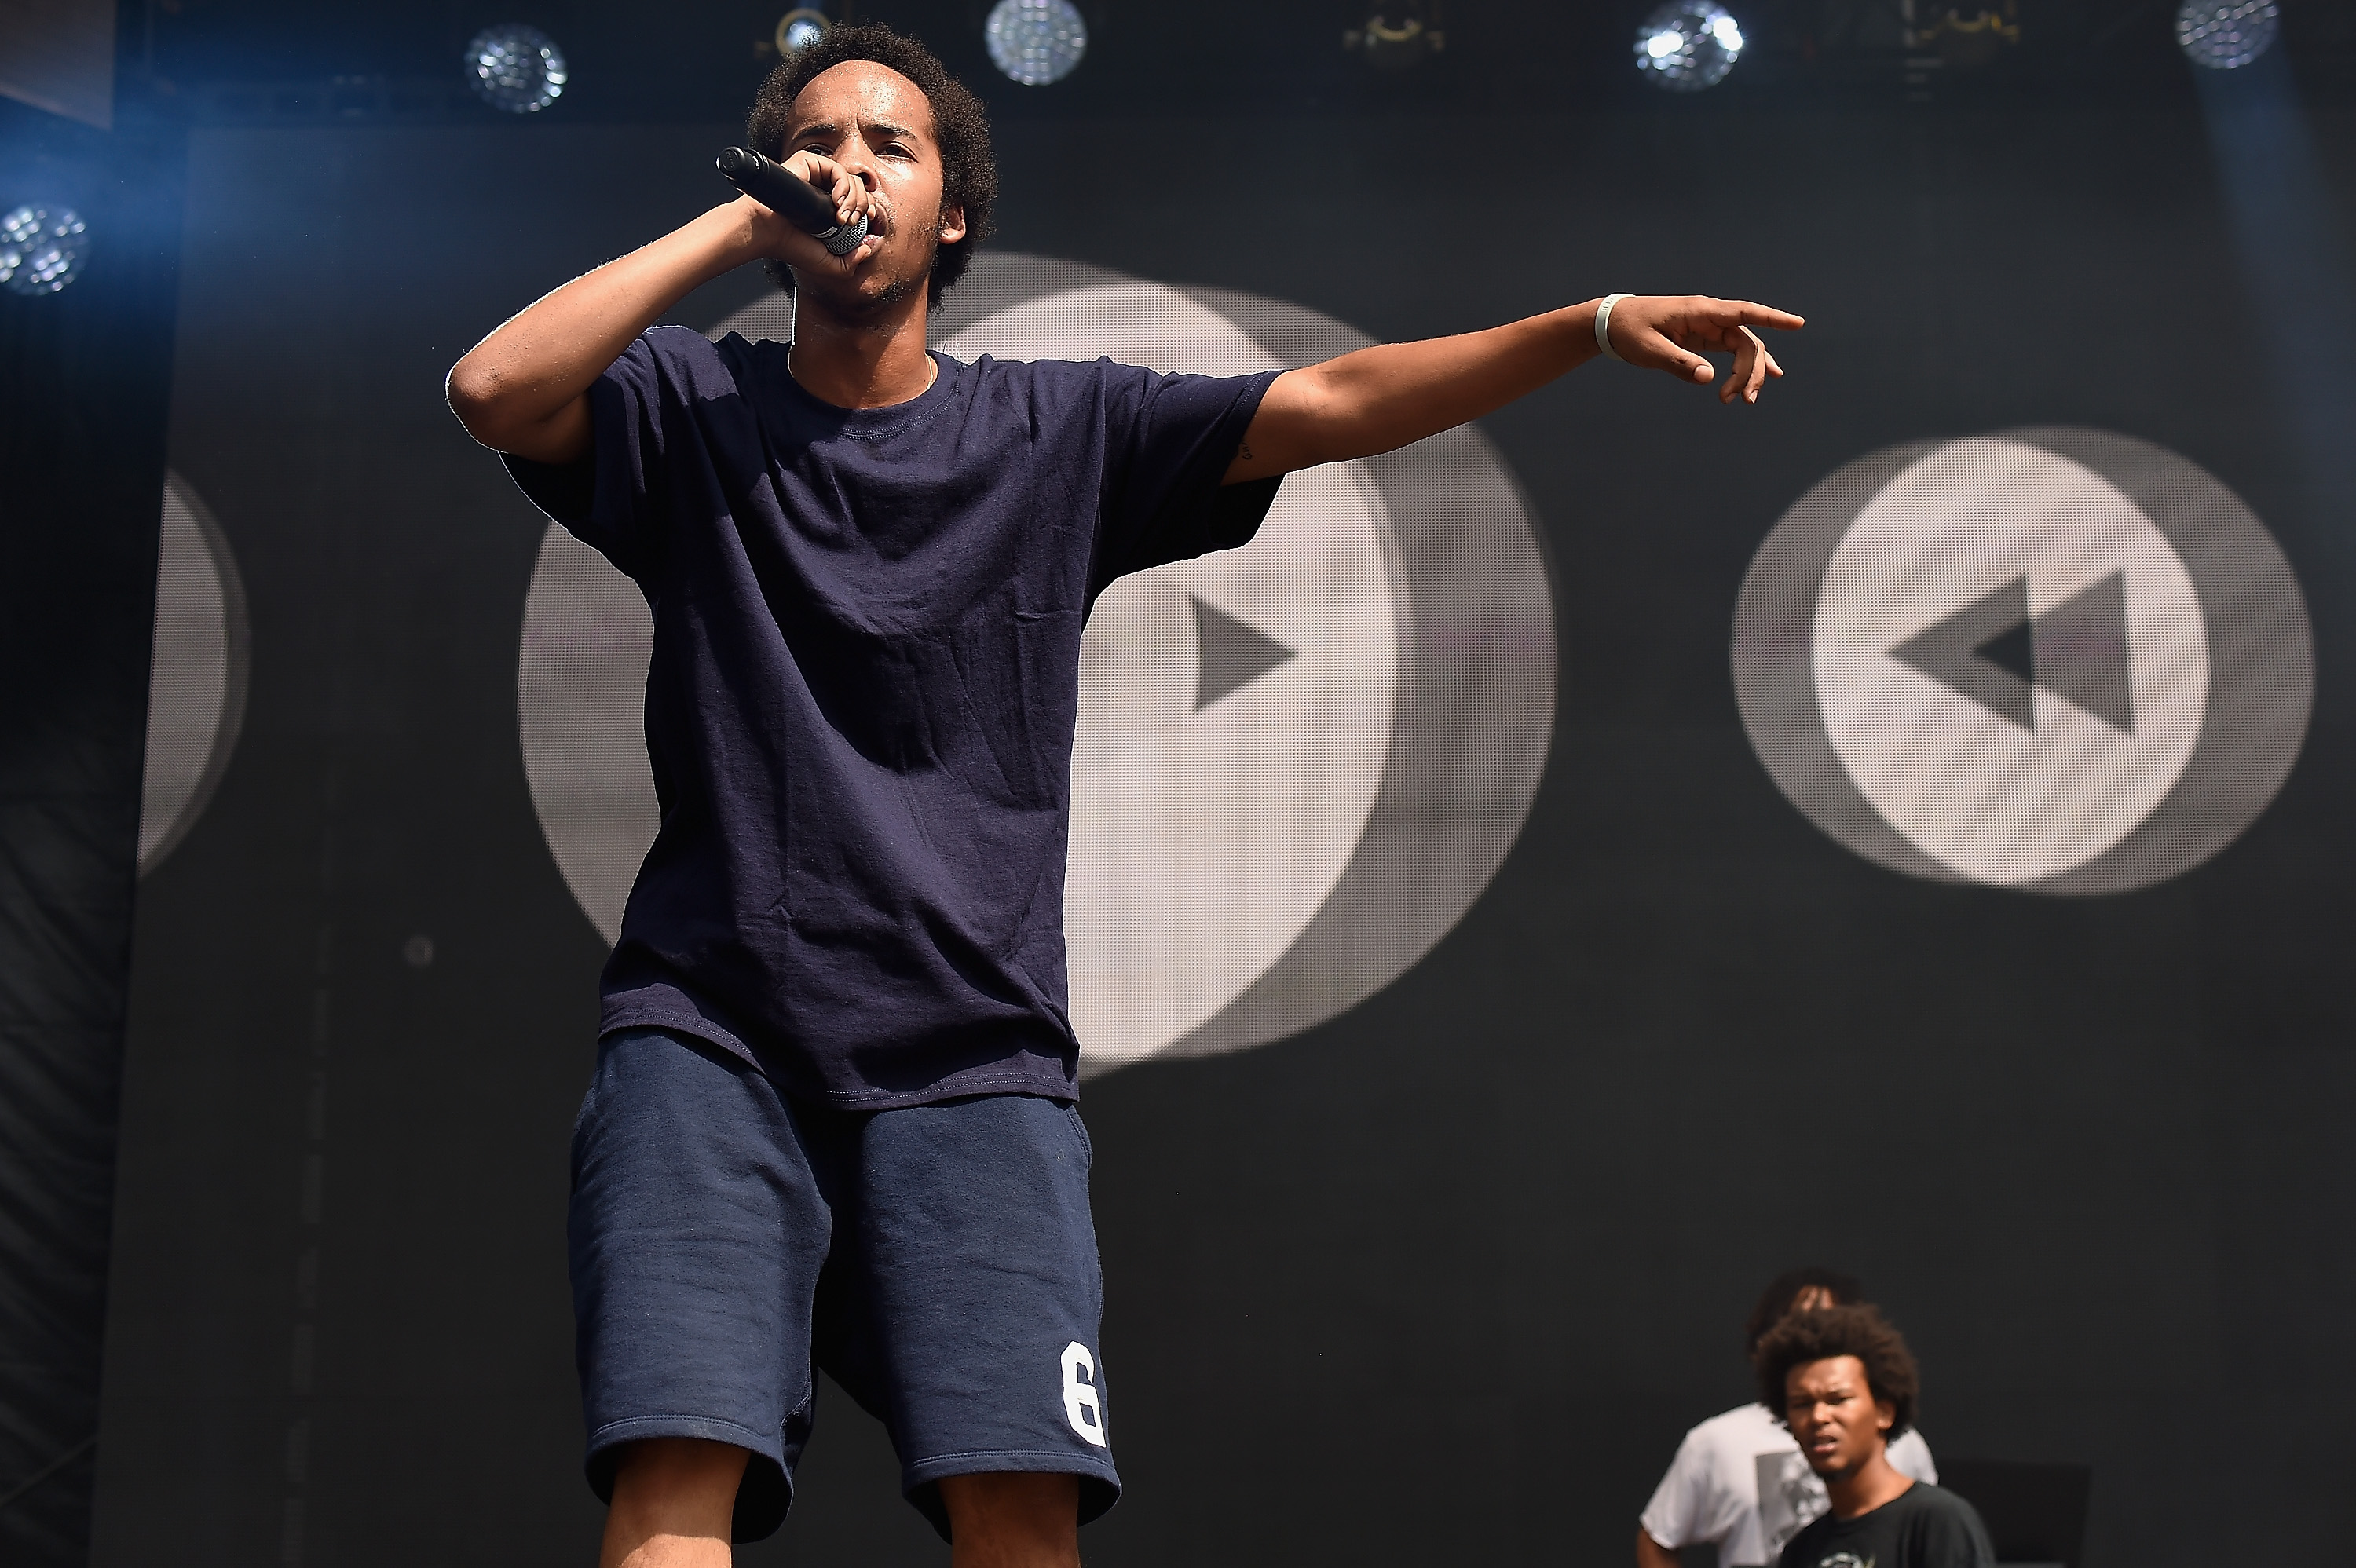 PHILADELPHIA, PA - SEPTEMBER 05: Rapper Earl Sweatshirt (L) performs onstage during the 2015 Budweiser Made in America Festival at Benjamin Franklin Parkway on September 5, 2015 in Philadelphia, Pennsylvania. (Photo by Kevin Mazur/Getty Images for Anheuser-Busch)